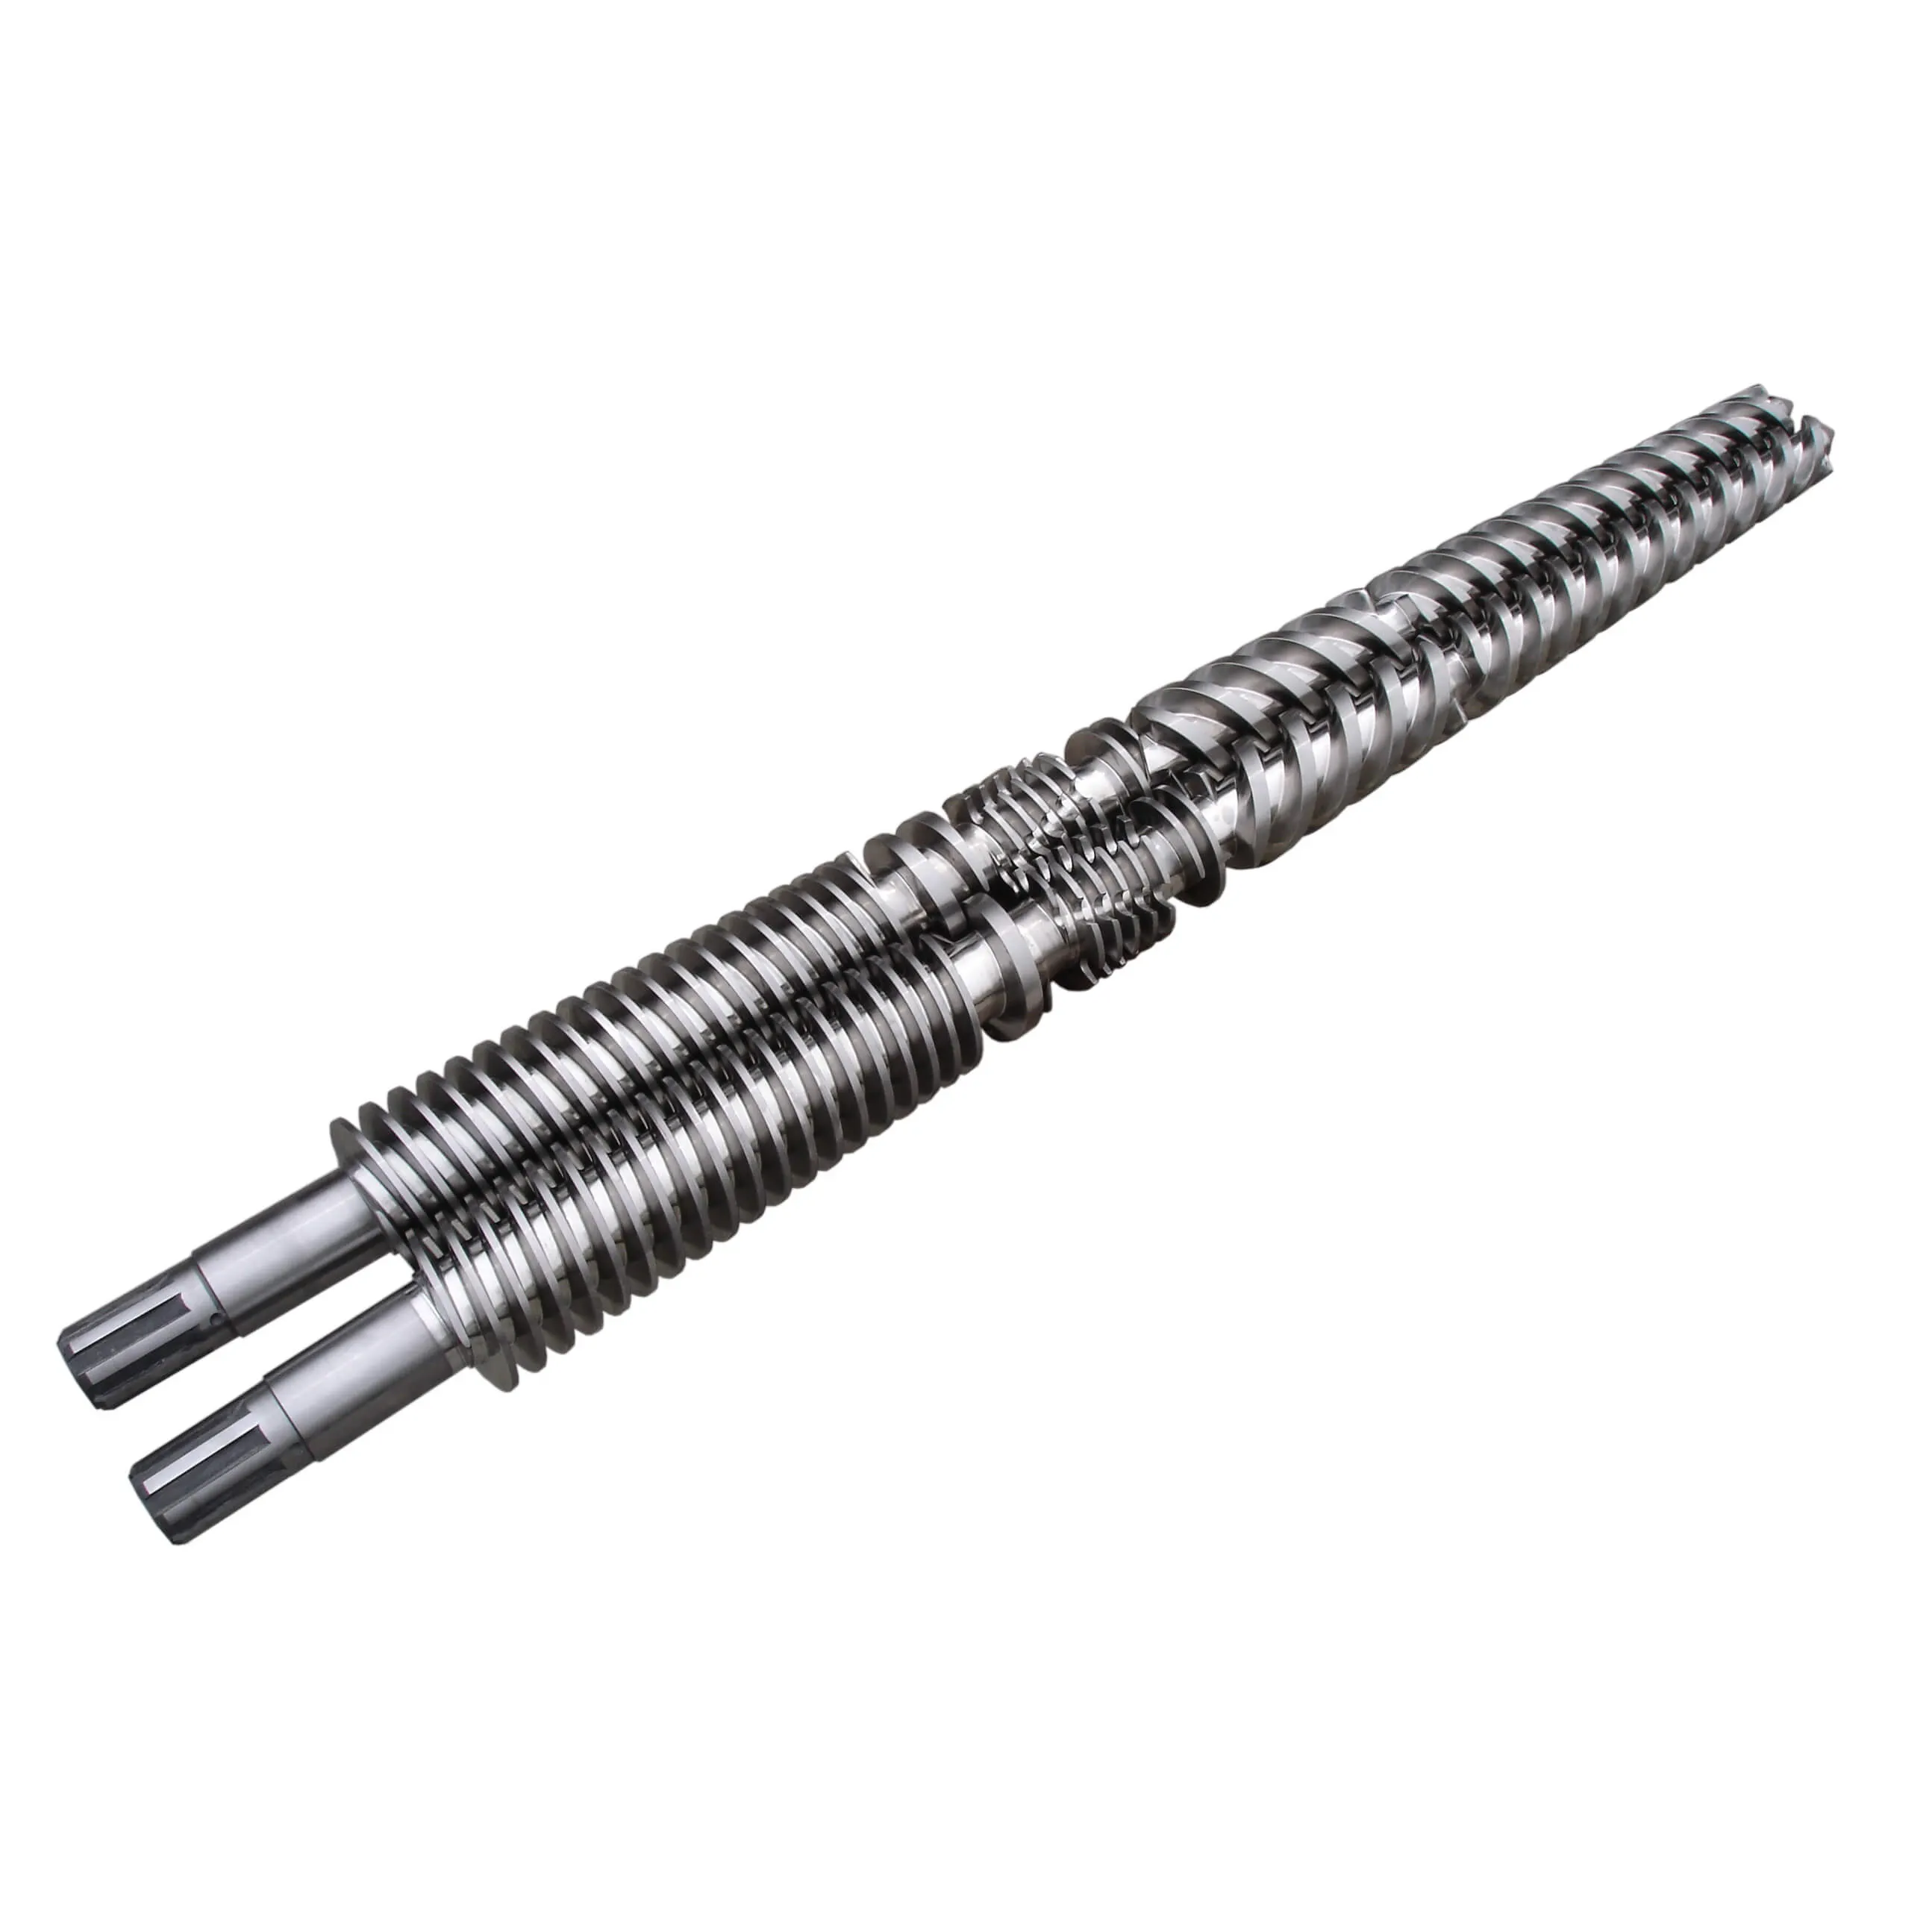 Parallel extruder screw barrel conical twin screw and barrel for extruder at cheaper price and sizing measuring service free